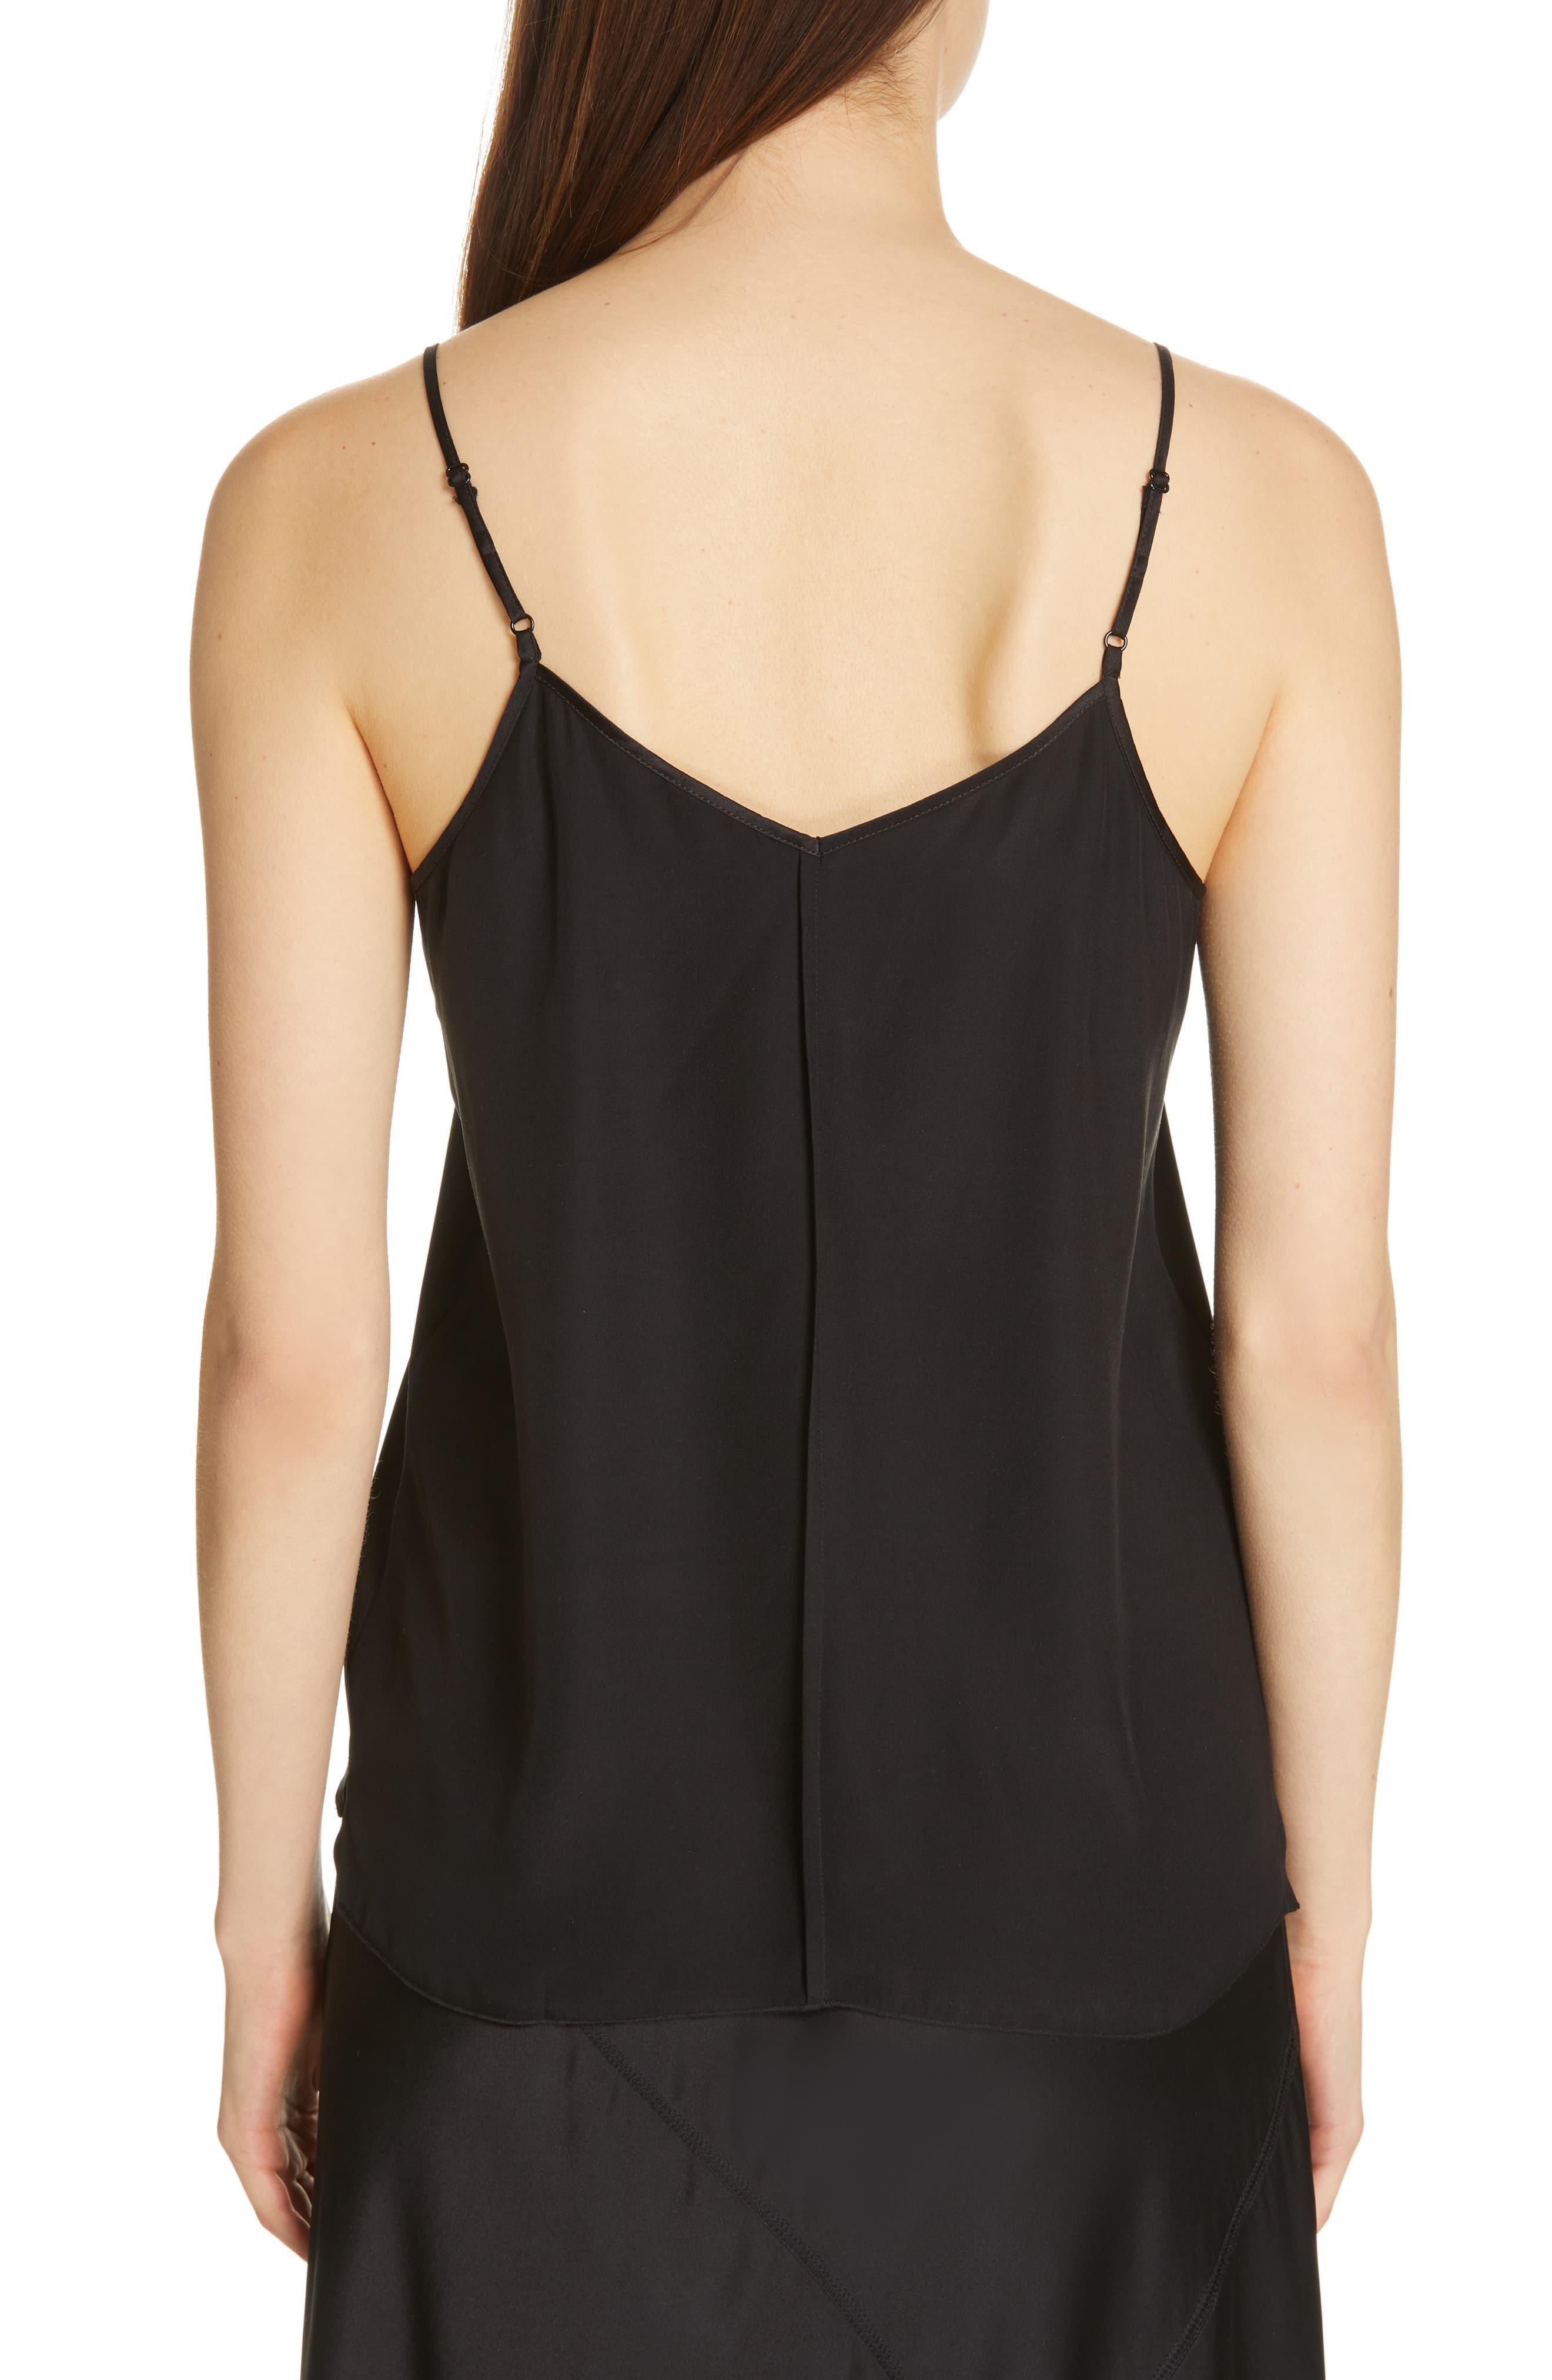 ATM Silk Charmeuse Camisole in Black - Lyst